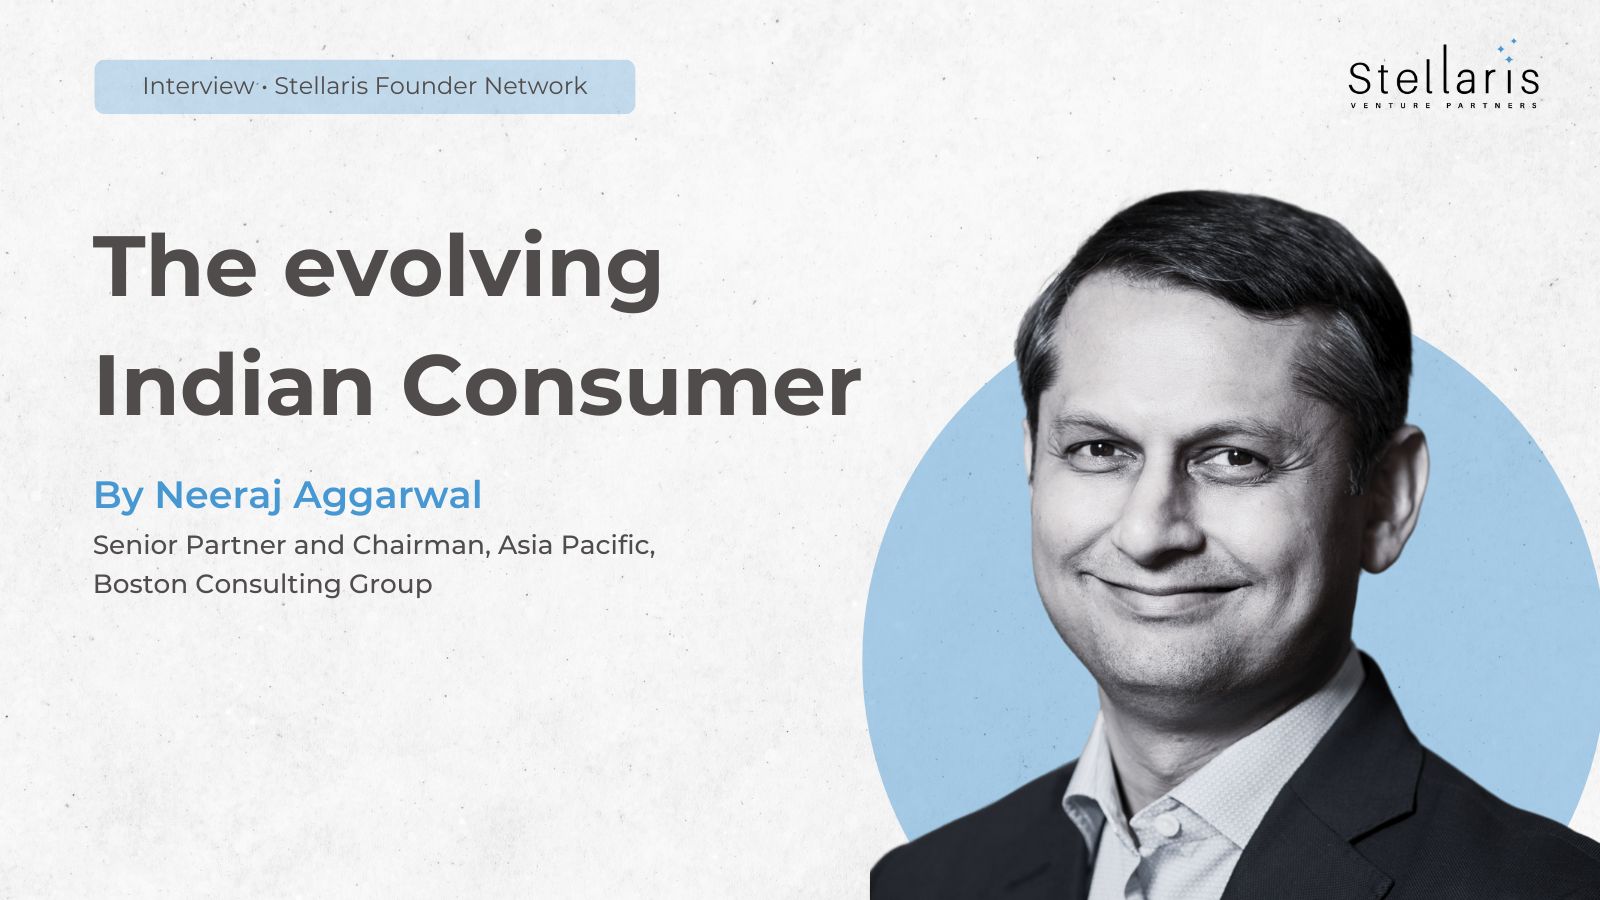 Interview: The evolving Indian Consumer